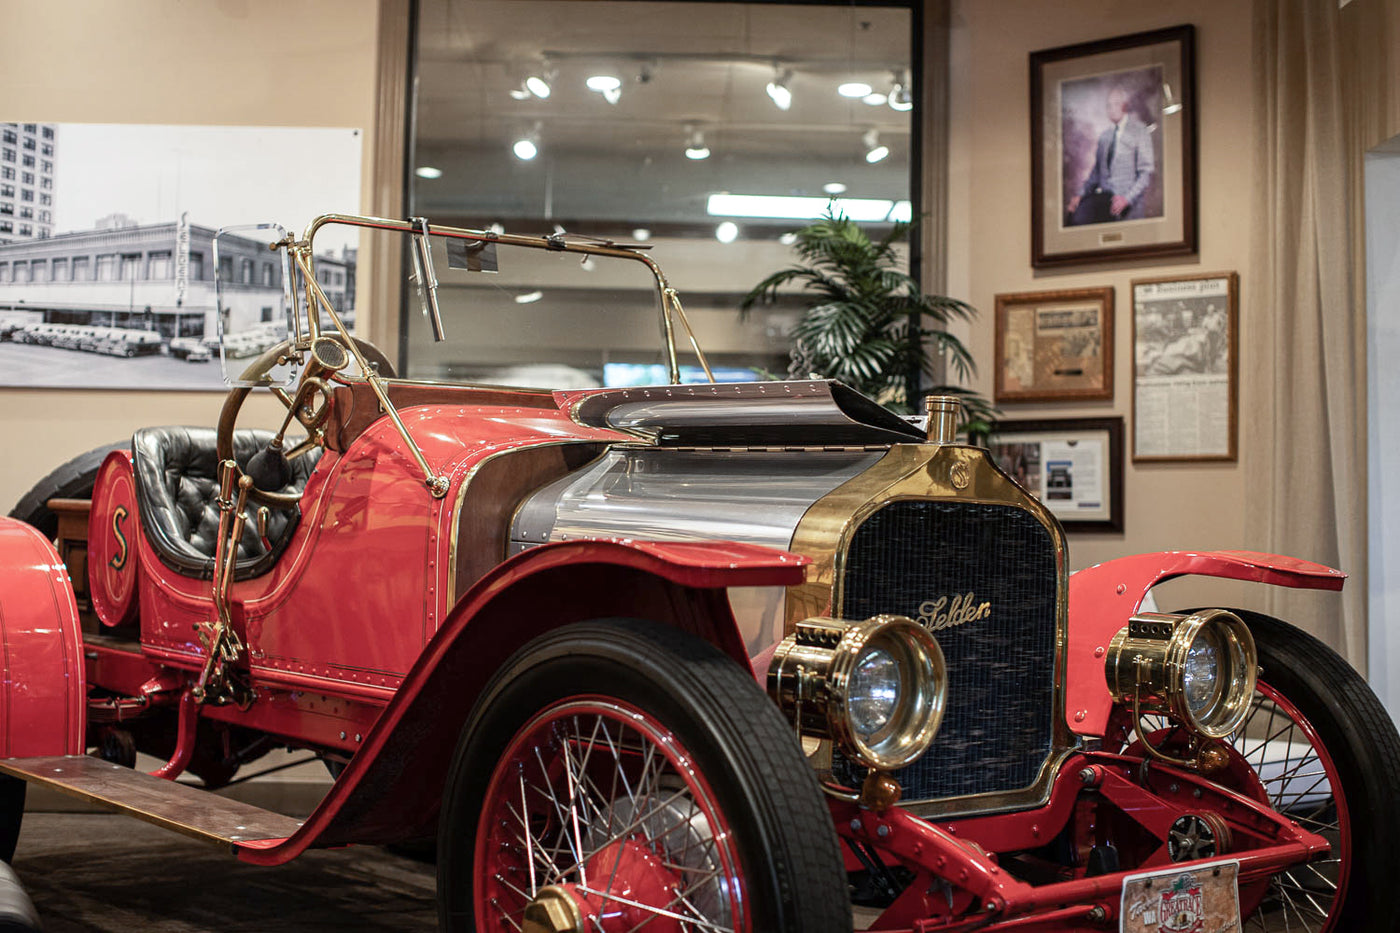 A vintage red vehicle parked inside the Seldens furniture showroom in Tacoma, Washington.